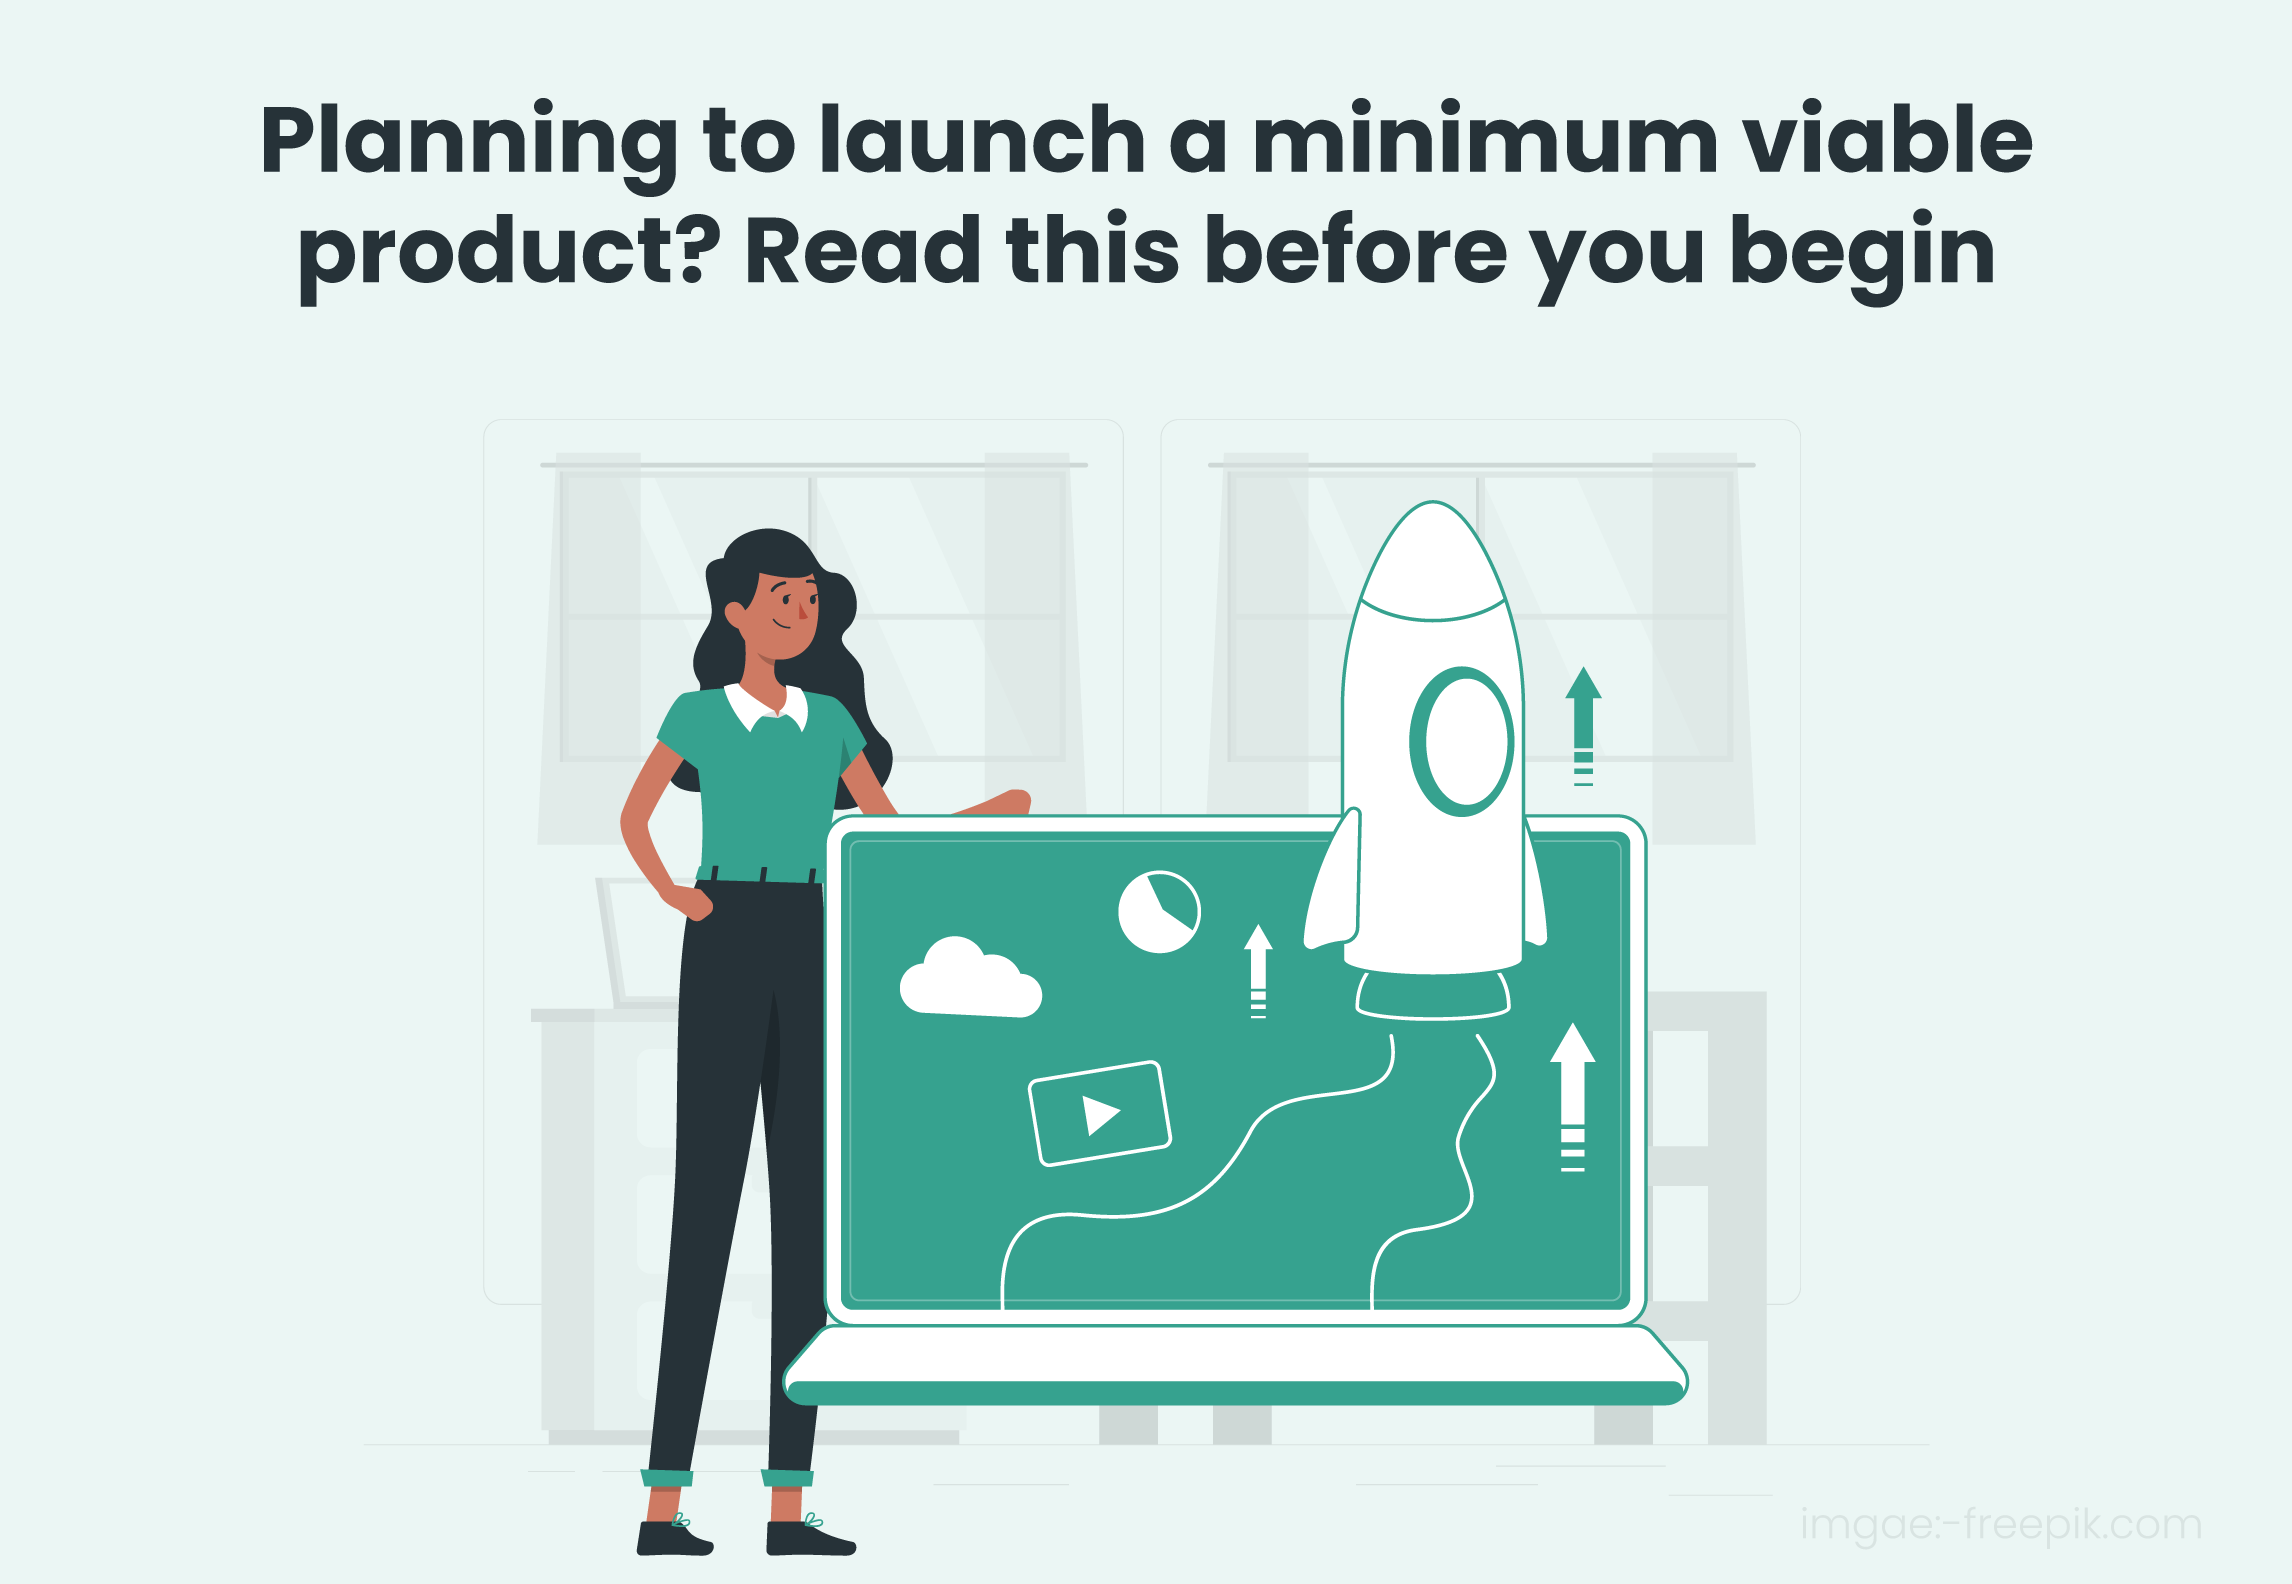 Planning to launch an MVP? Read this before you begin.